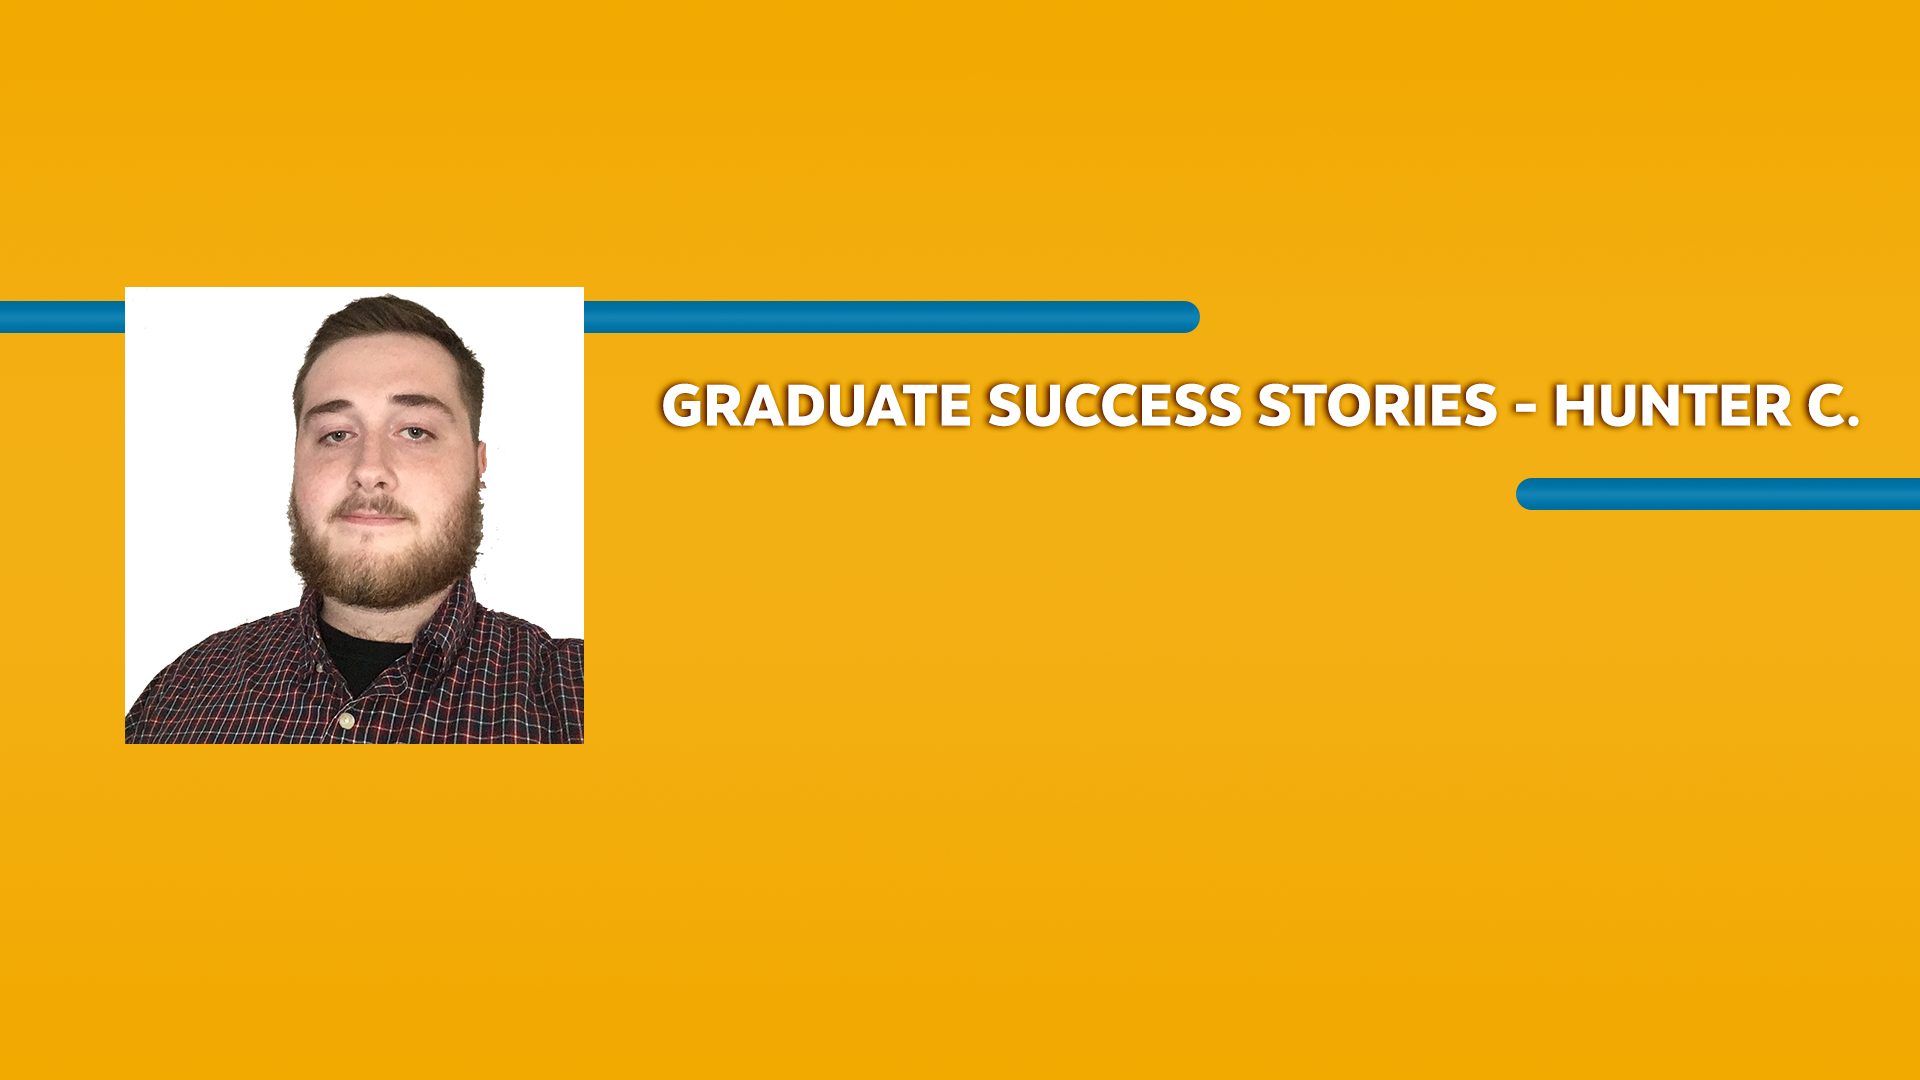 Orange rectangle with a picture of a man wearing a shirt and Graduate Success Stories - Hunter C. text in white font